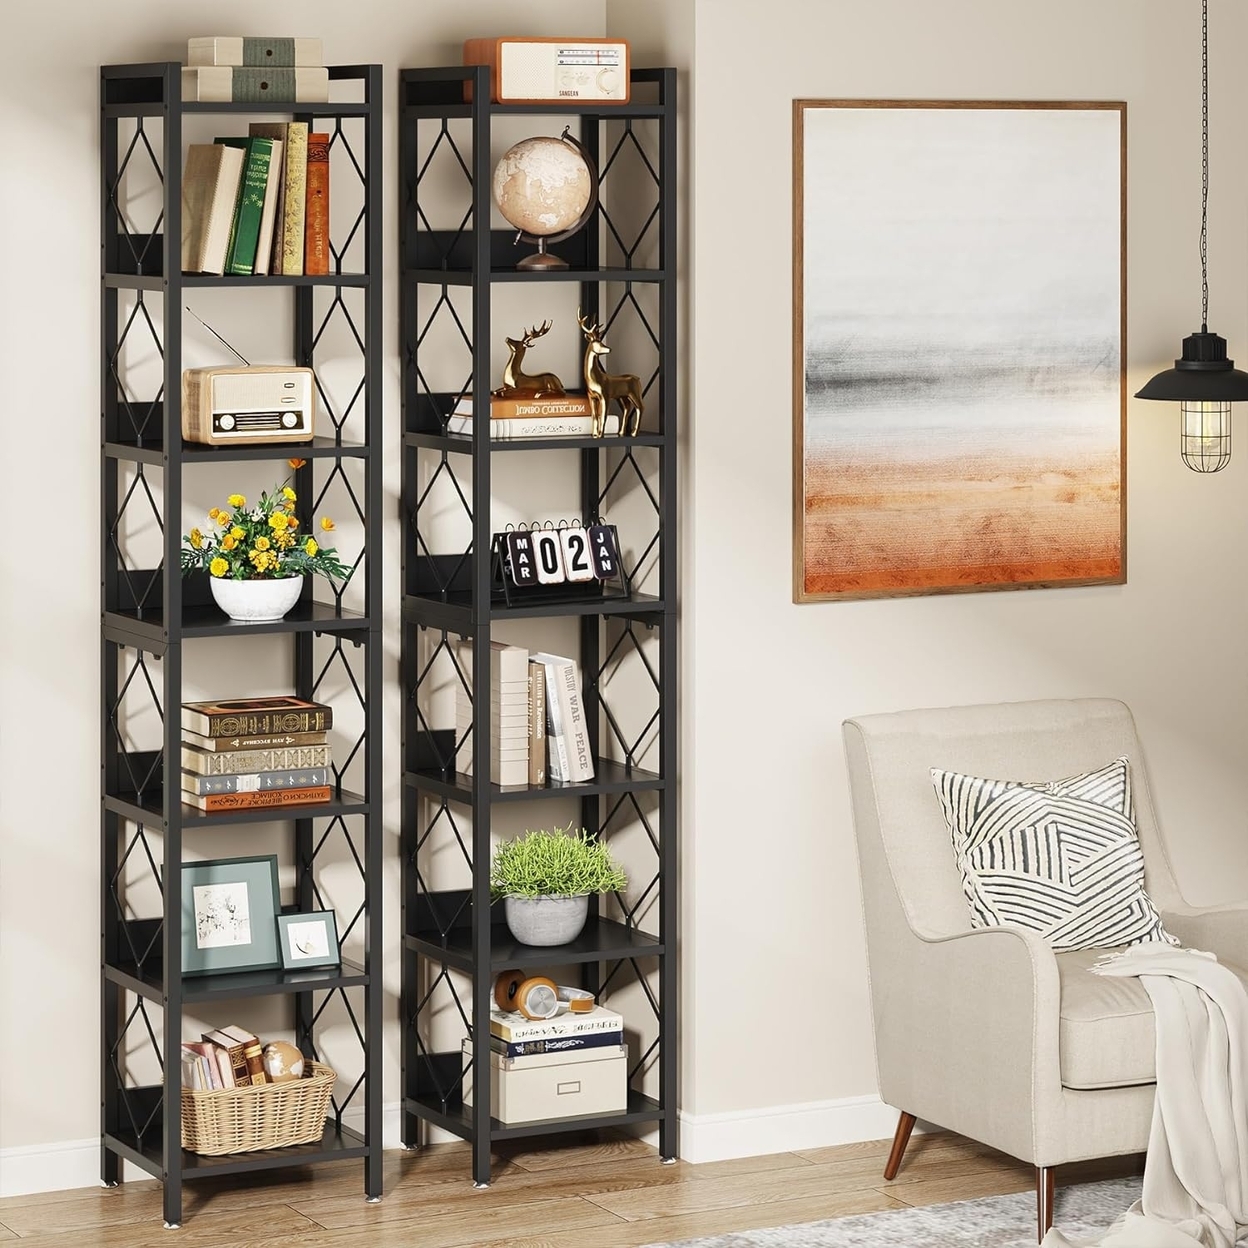 Tribesigns 78.7 Extra Tall Narrow Bookshelf, 7 Tier Skinny Bookcase For Small Spaces, Freestanding Display Shelves - Black, 2pcs